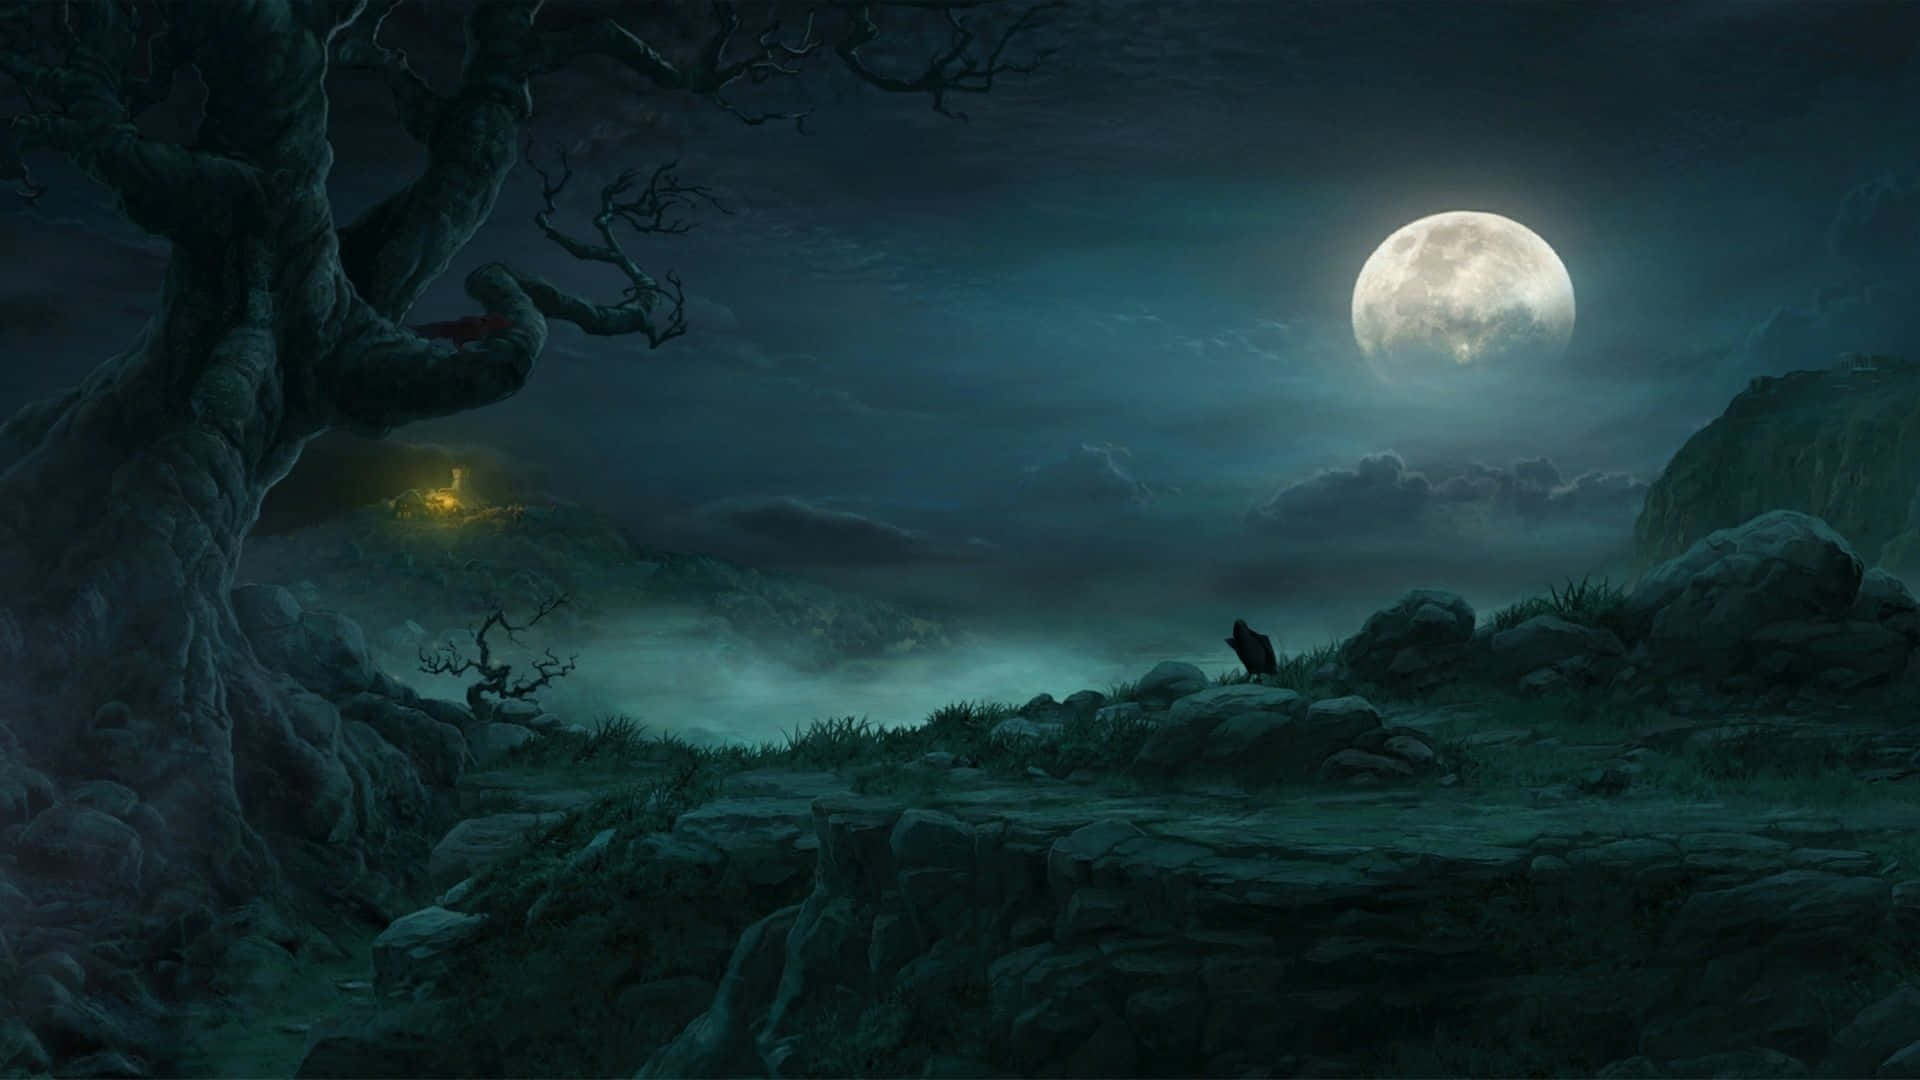 "A Glowing Path Through The Mystic Night Forest" Wallpaper